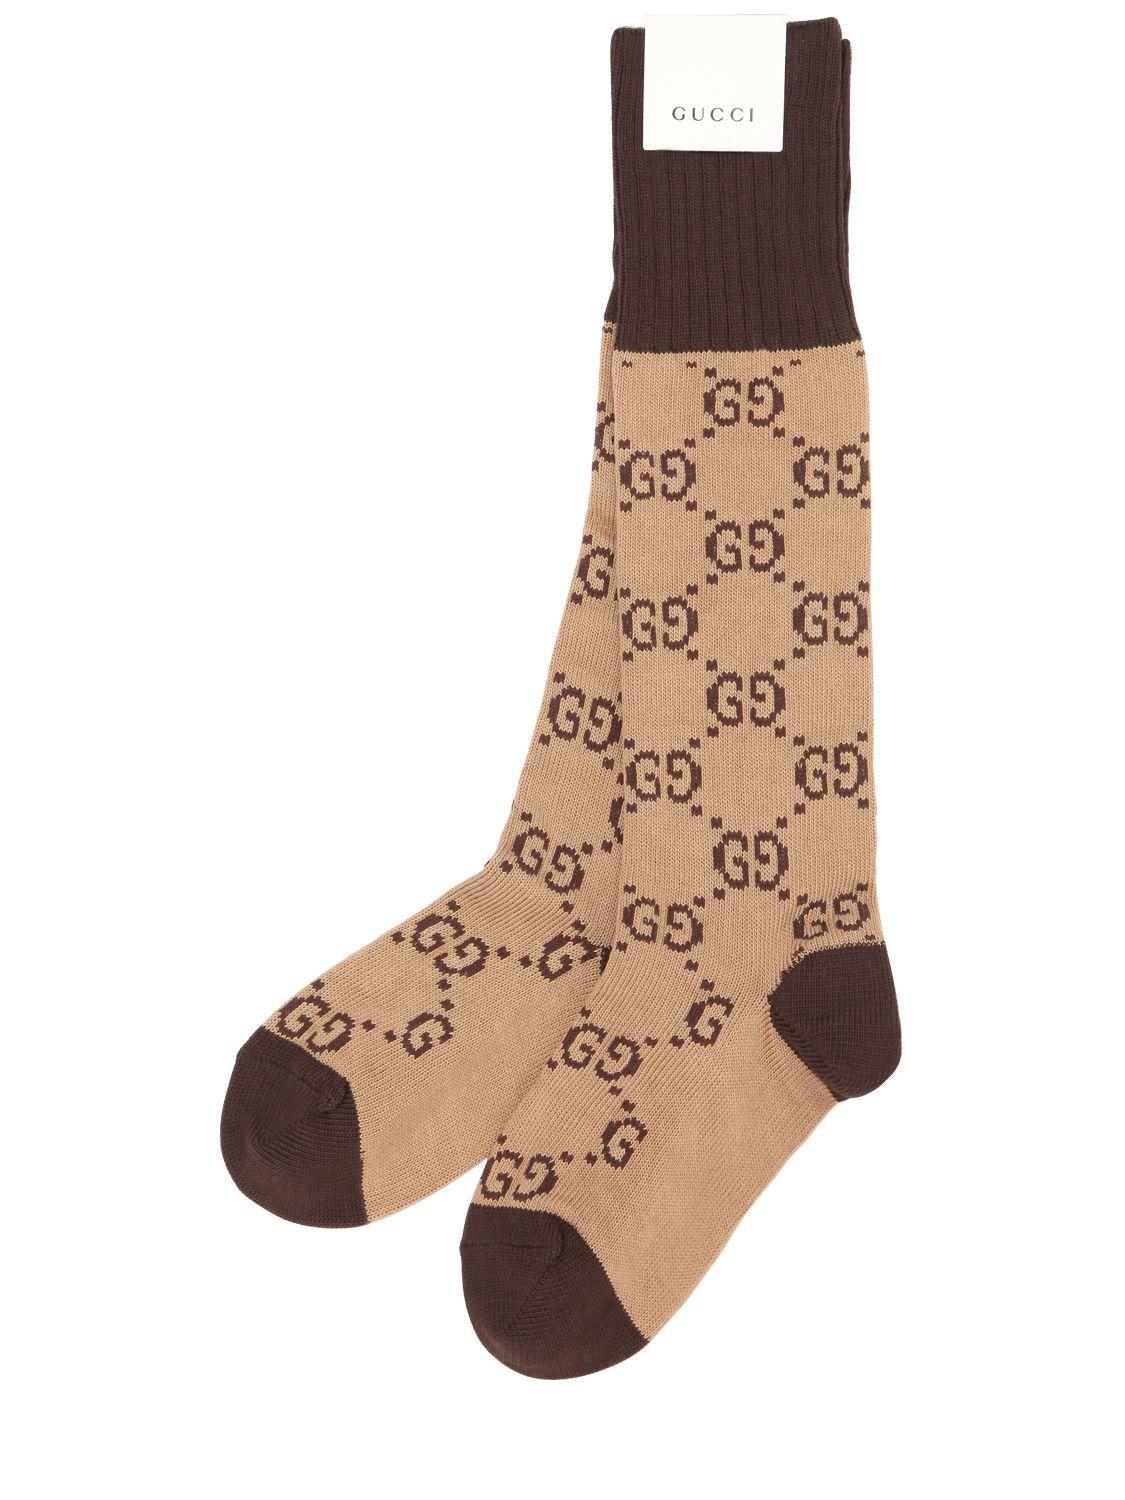 Lyst - Gucci Gg Cotton Knee High Socks in Brown